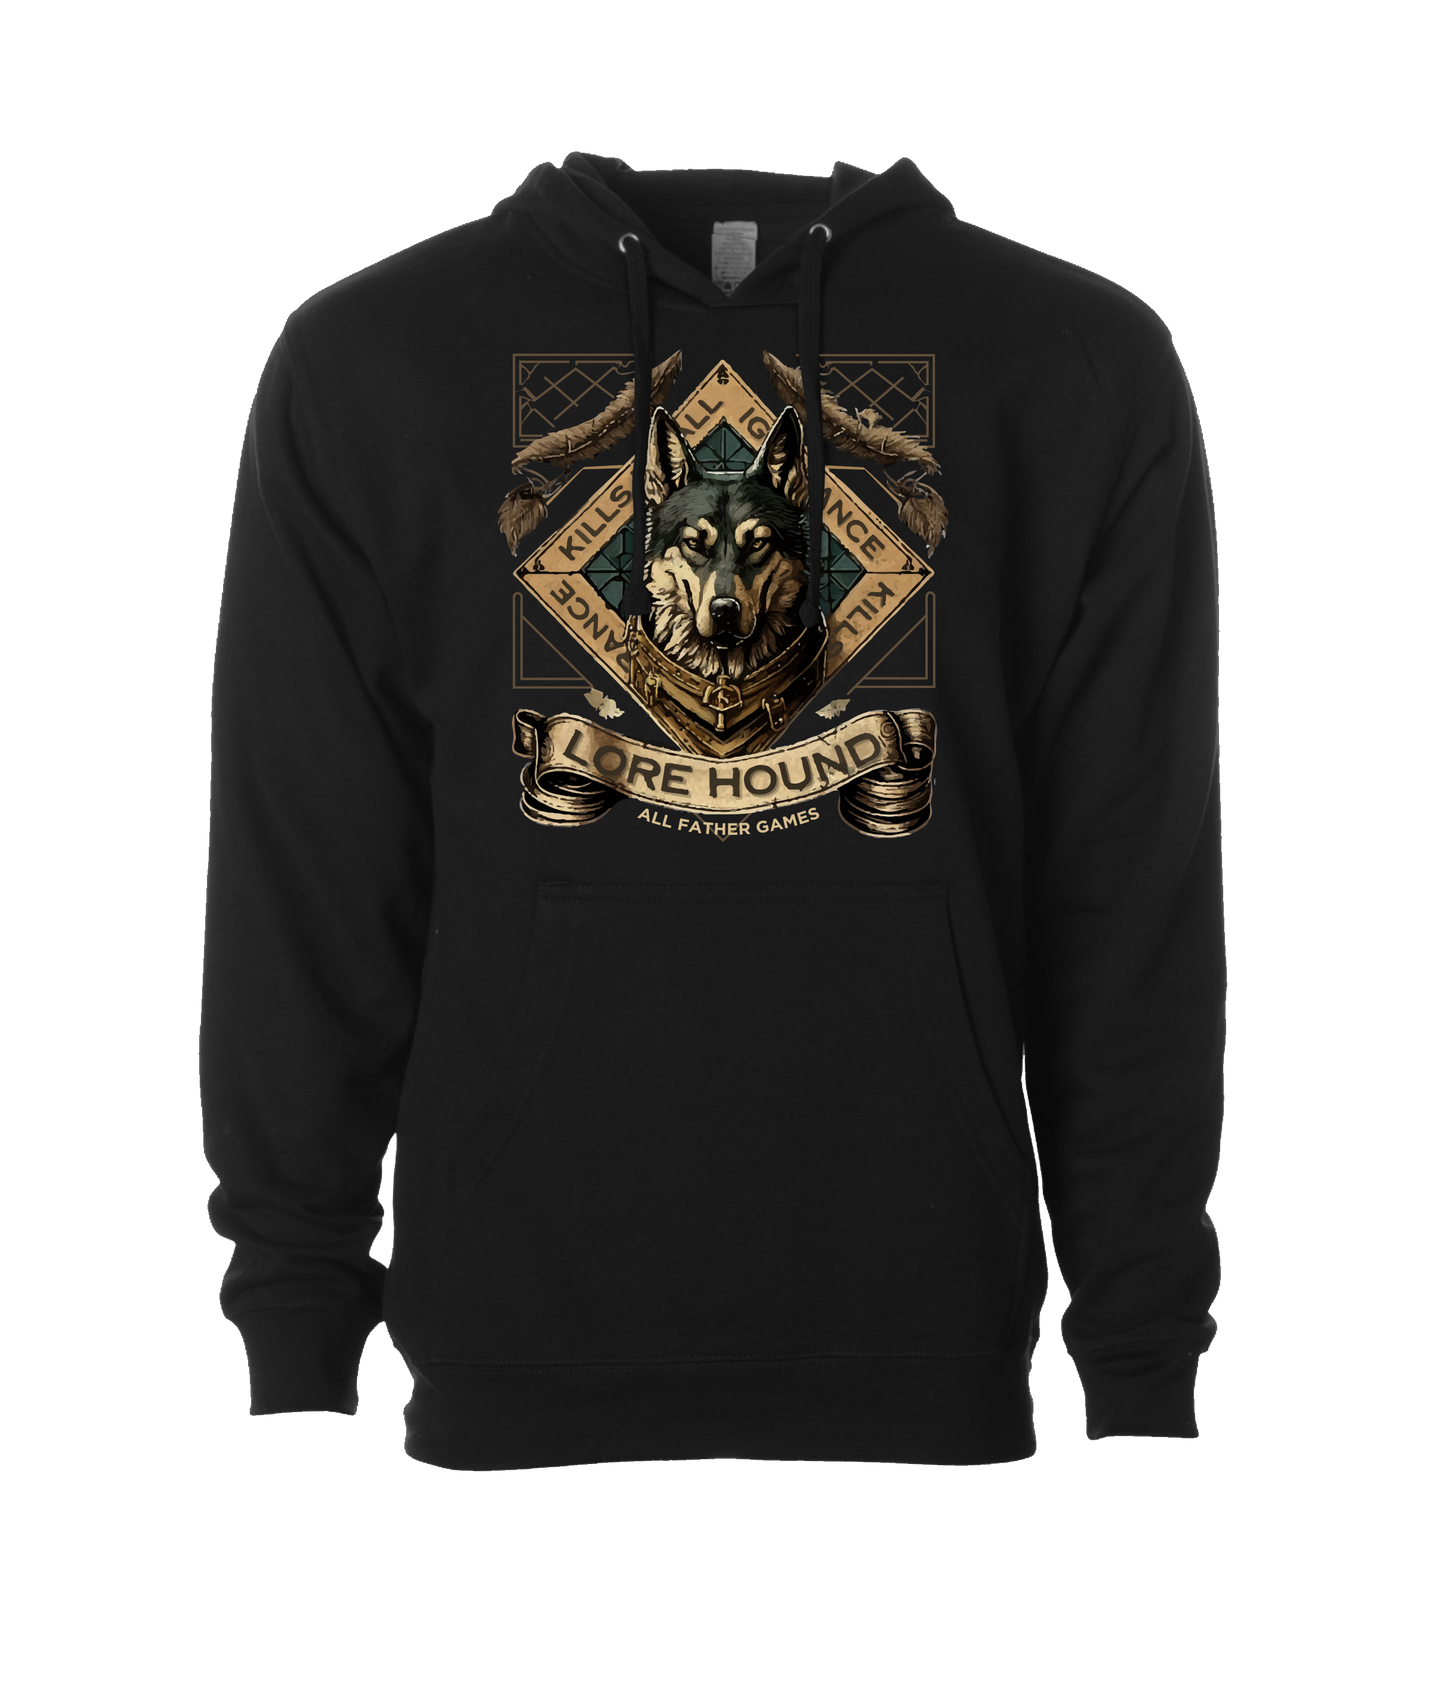 All Father Games - LORE HOUND - Black Hoodie